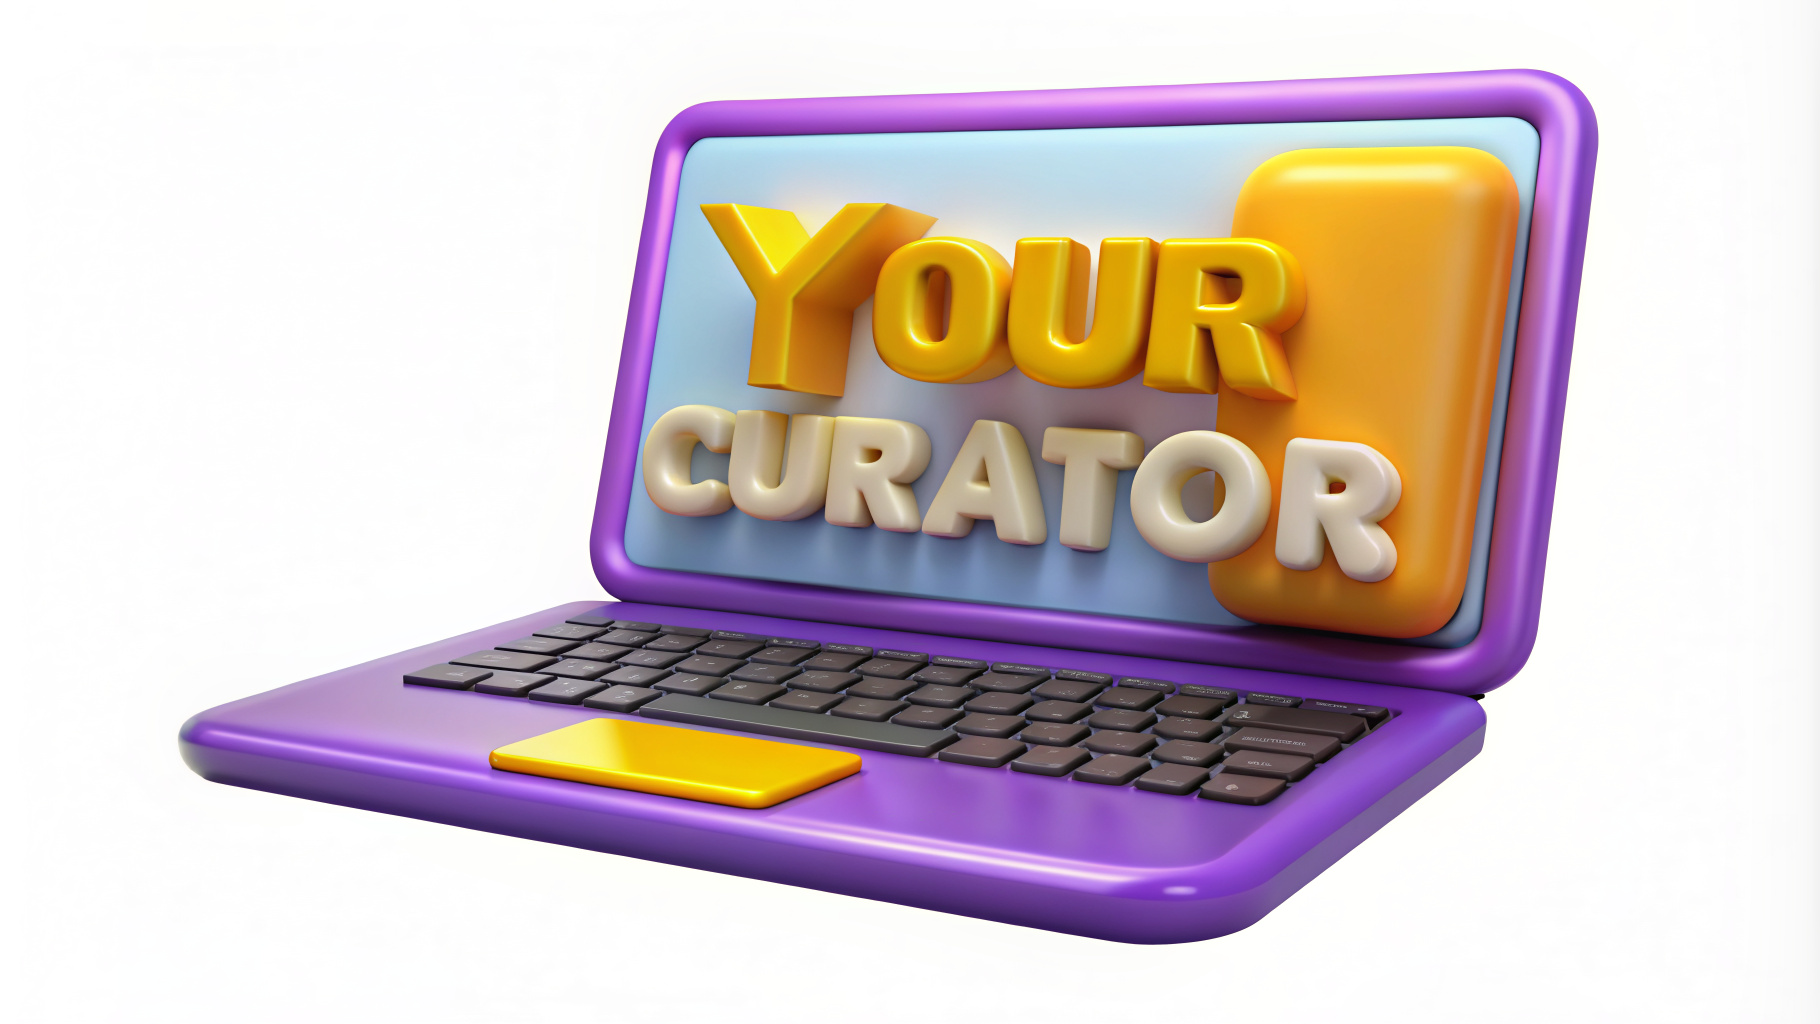 The inscription "YOUR Curator" on the background of a laptop